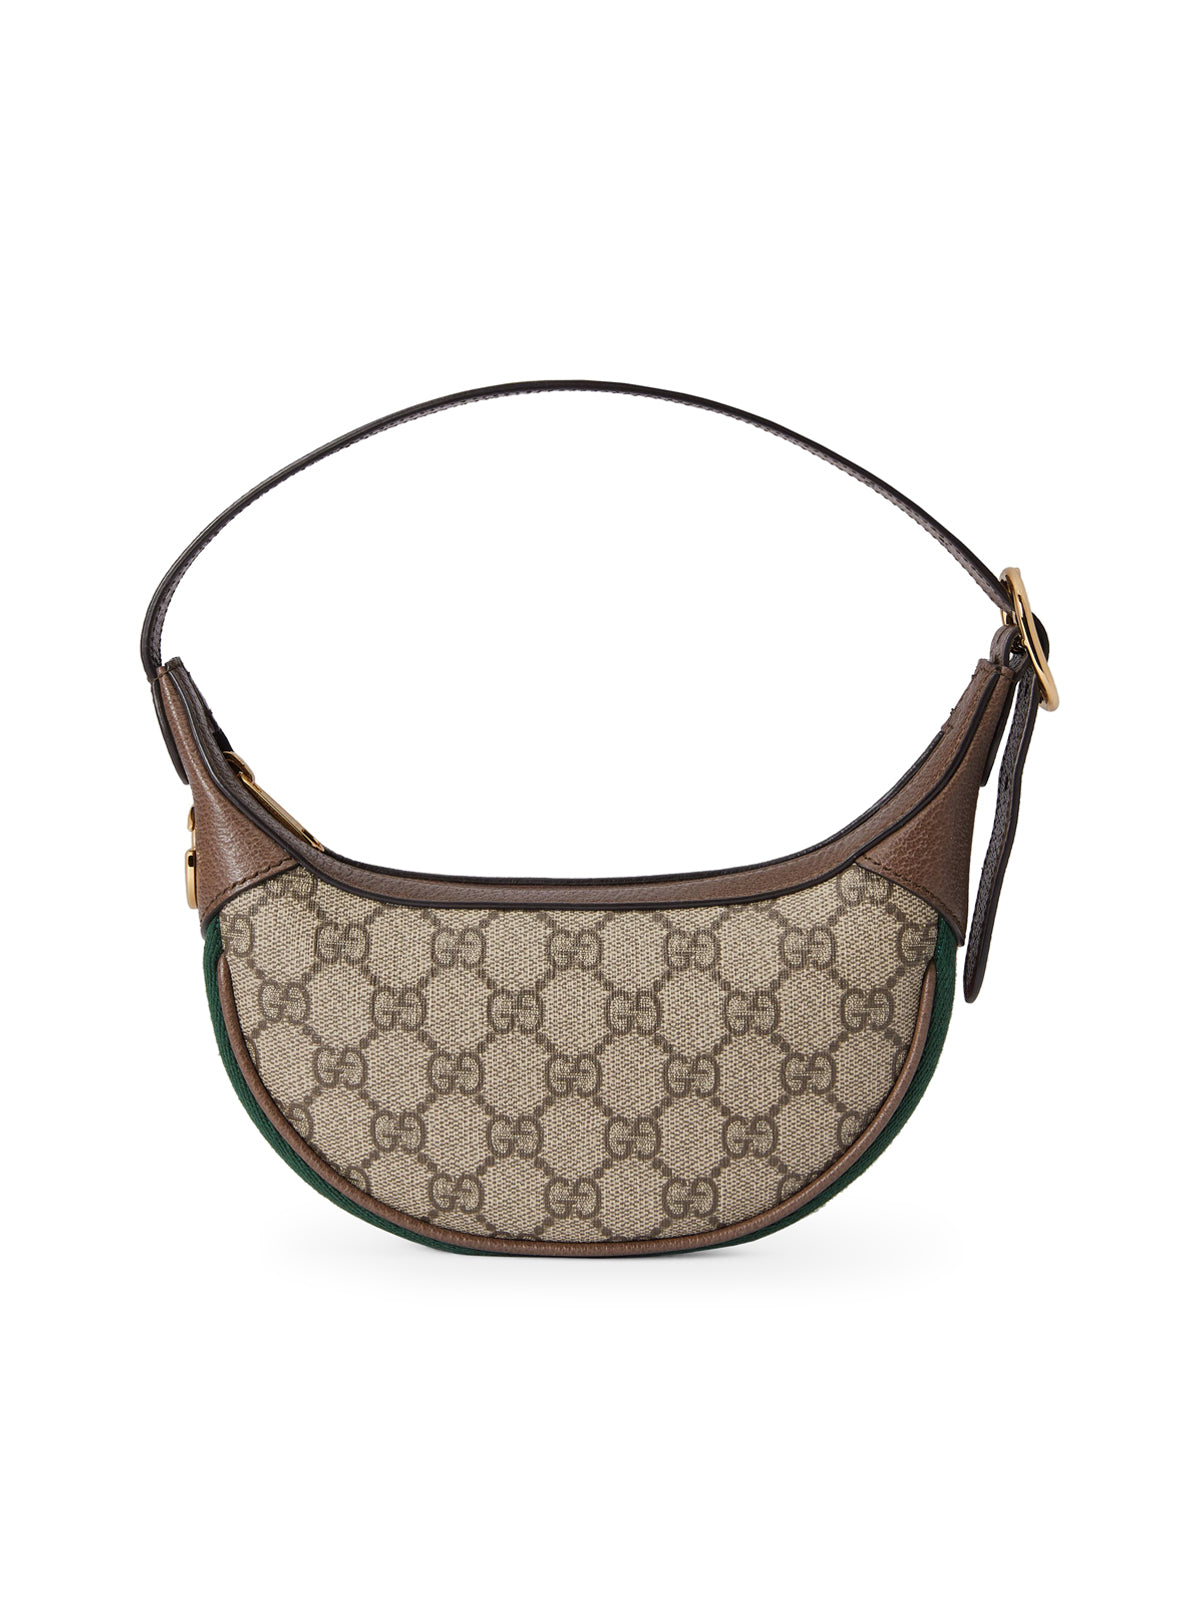 Gucci Ophidia GG Top Handle Mini Bag With Web In Brown - Praise To